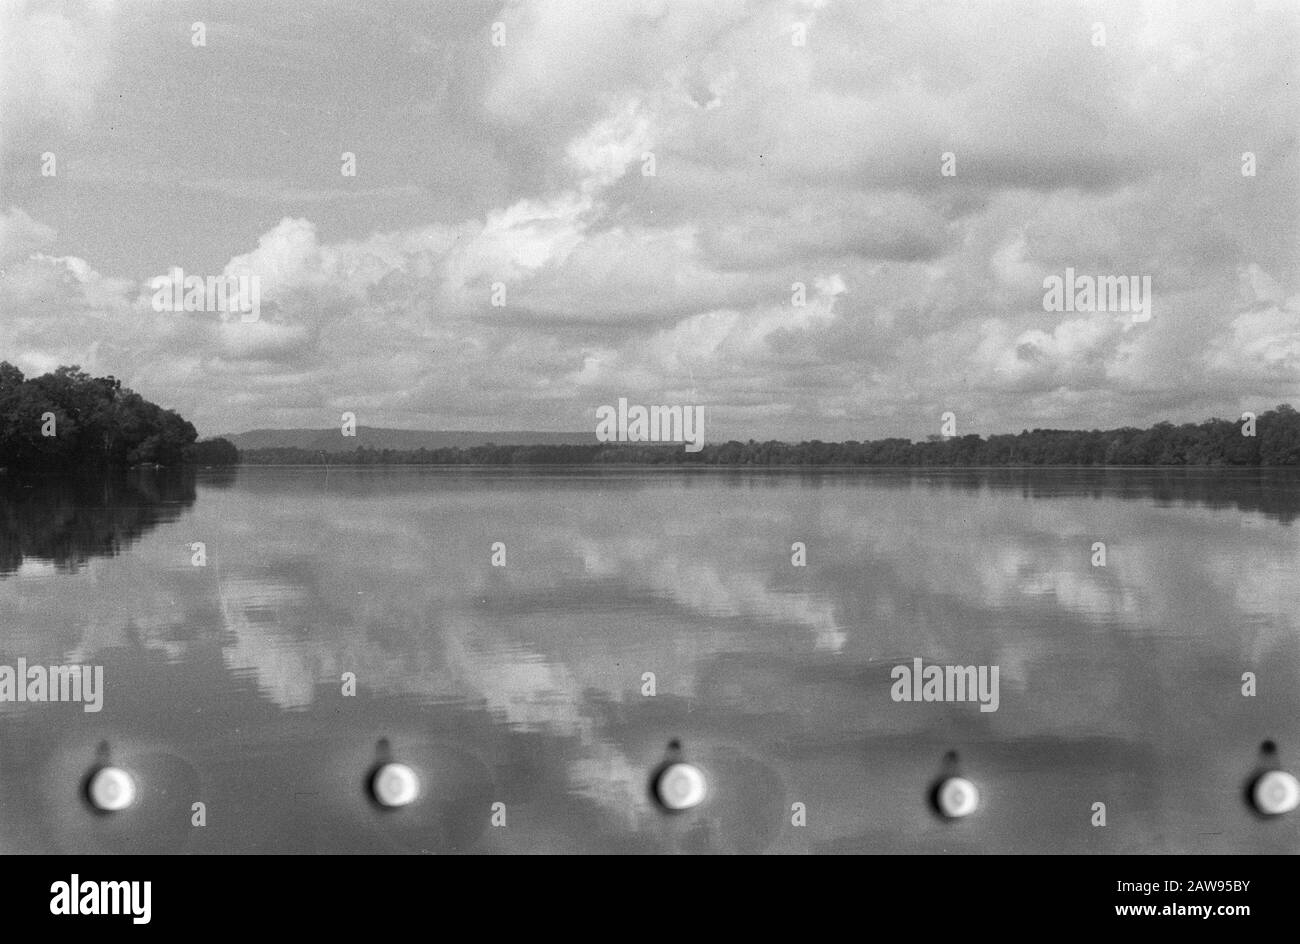 Landscape with broad river and cloudy sky Date: 01/01/1947 Location: Indonesia Dutch East Indies Stock Photo